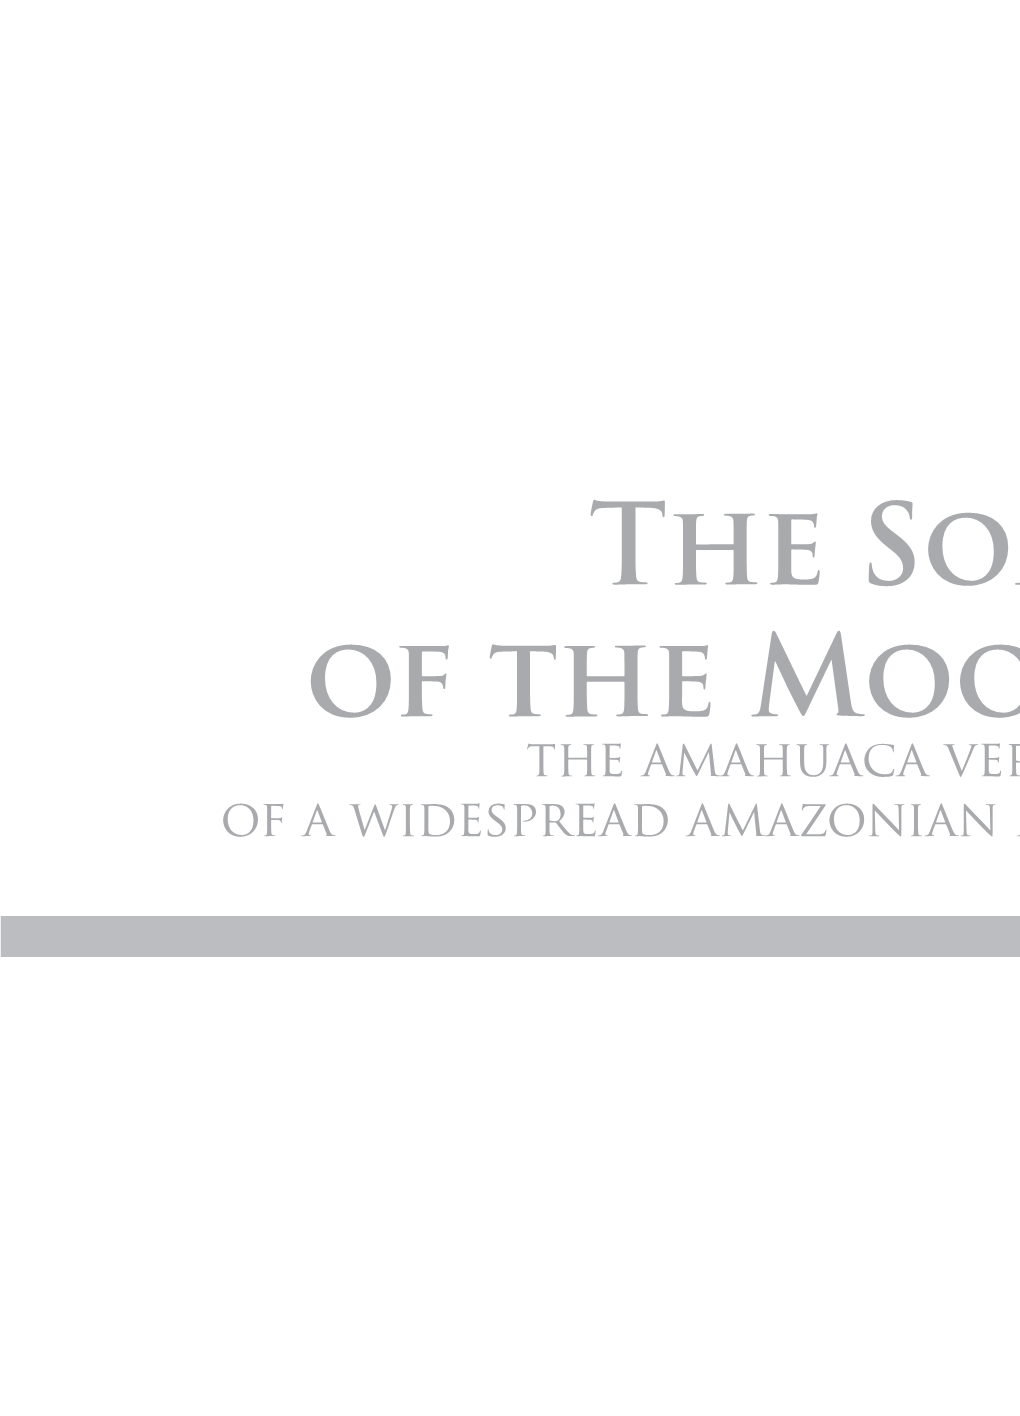 The Sons of the Moon: the Amahuaca Version of a Widespread Amazonian Myth